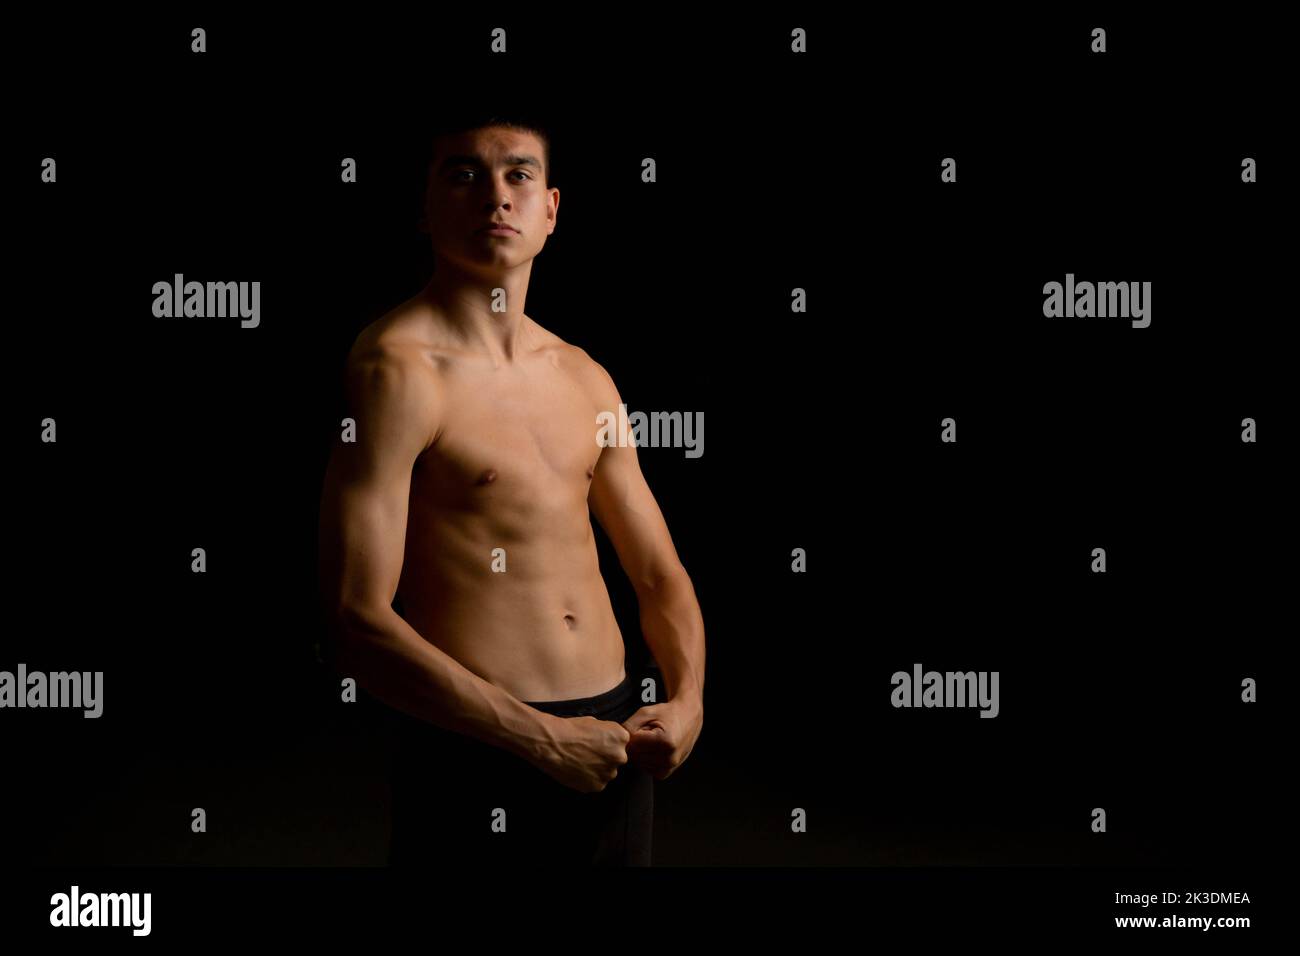 Portrait of a 19 year old shirtless teenage boy on a black background Stock Photo